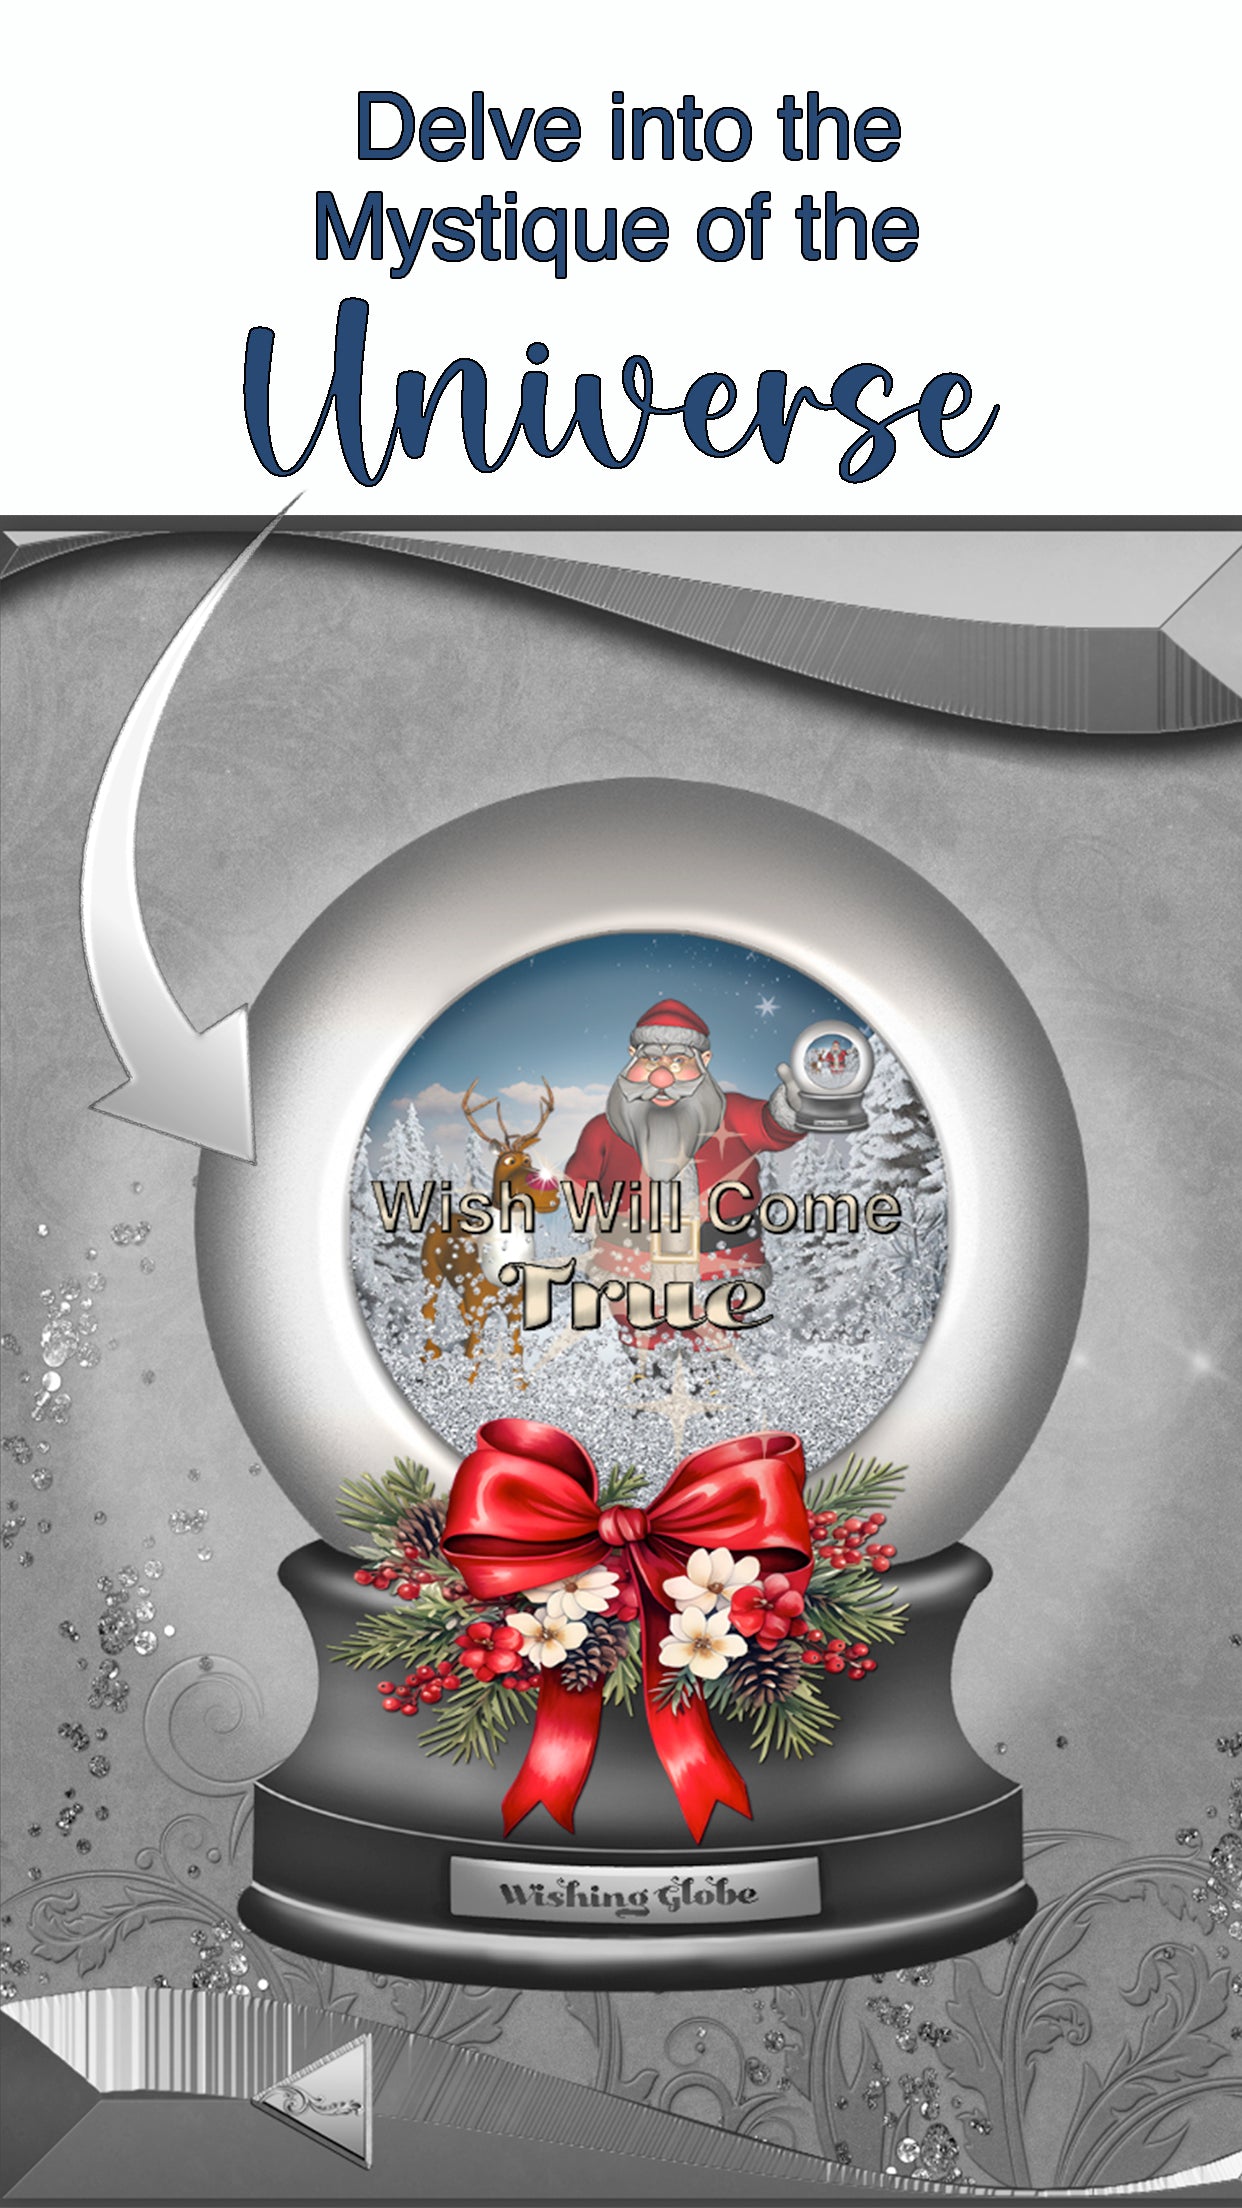 Santa's Wishing Globe App- Embrace The Possibility! - More Than Charms